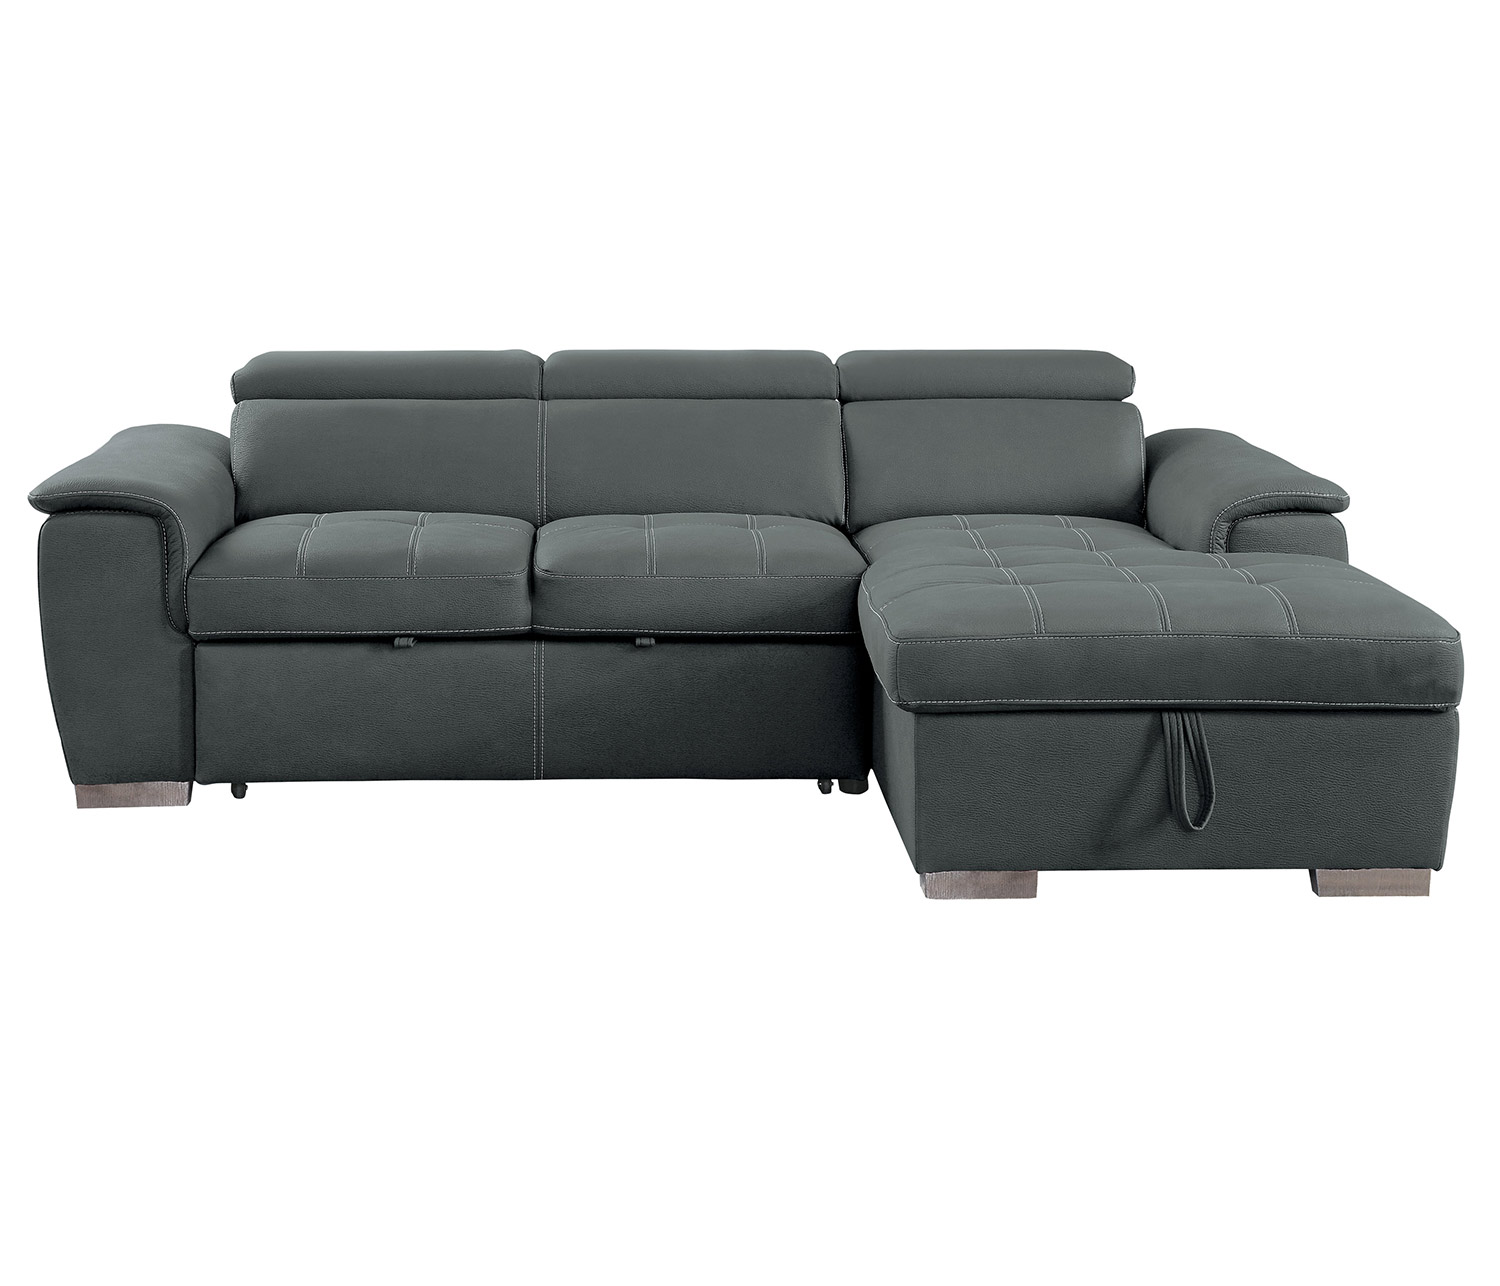 Homelegance Ferriday Sectional with Pull-out Bed and Hidden Storage Set - Gray